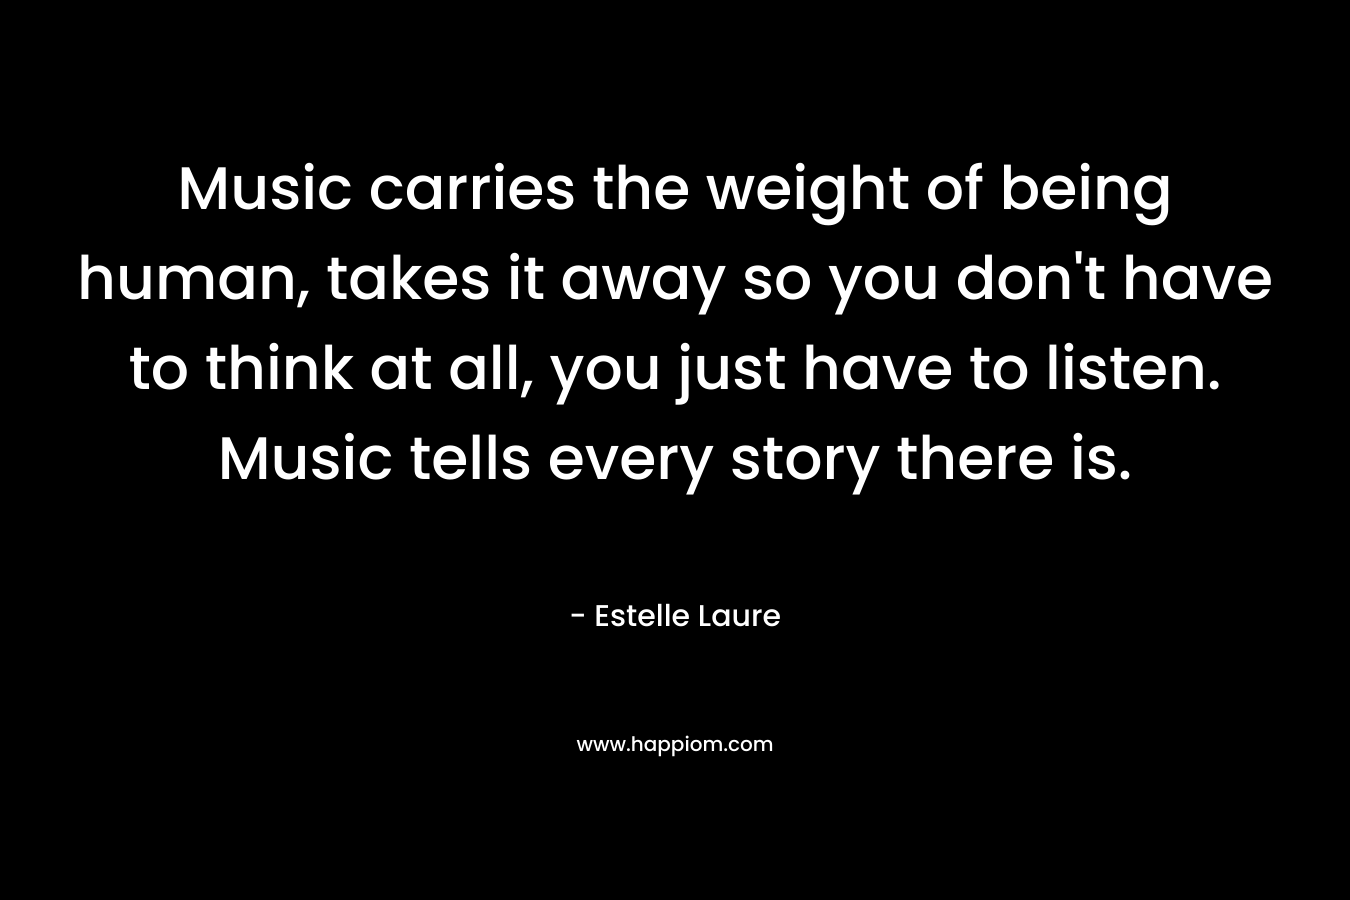 Music carries the weight of being human, takes it away so you don't have to think at all, you just have to listen. Music tells every story there is.